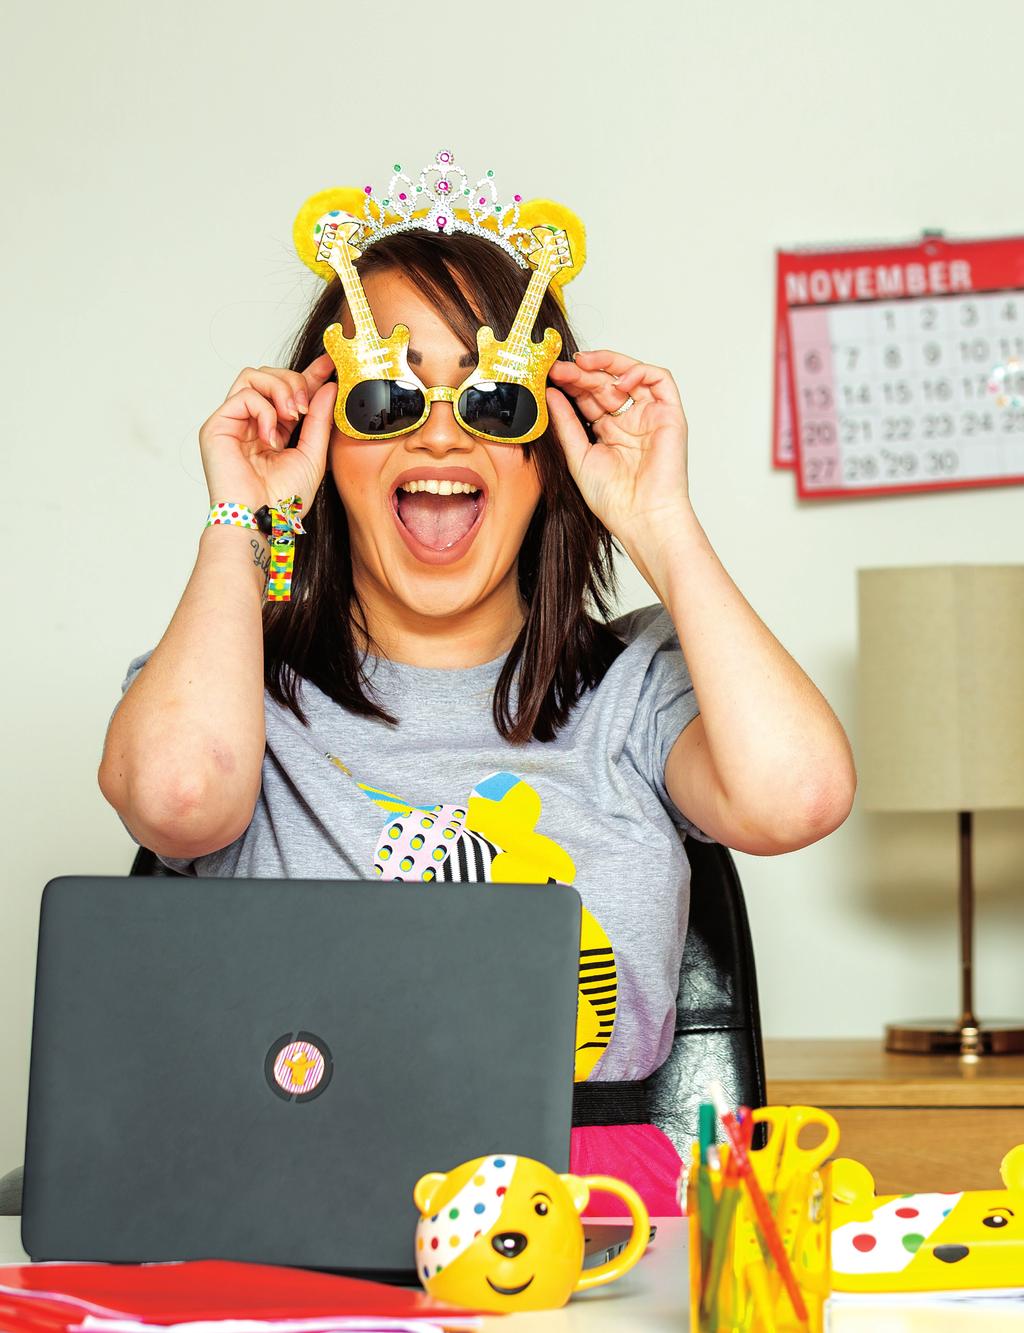 unleash your inner Pudsey Unleash your inner Pudsey and come to work wearing spots. Whether it s headto-toe spots or just spotty socks, face paint or stickers, all spots count!